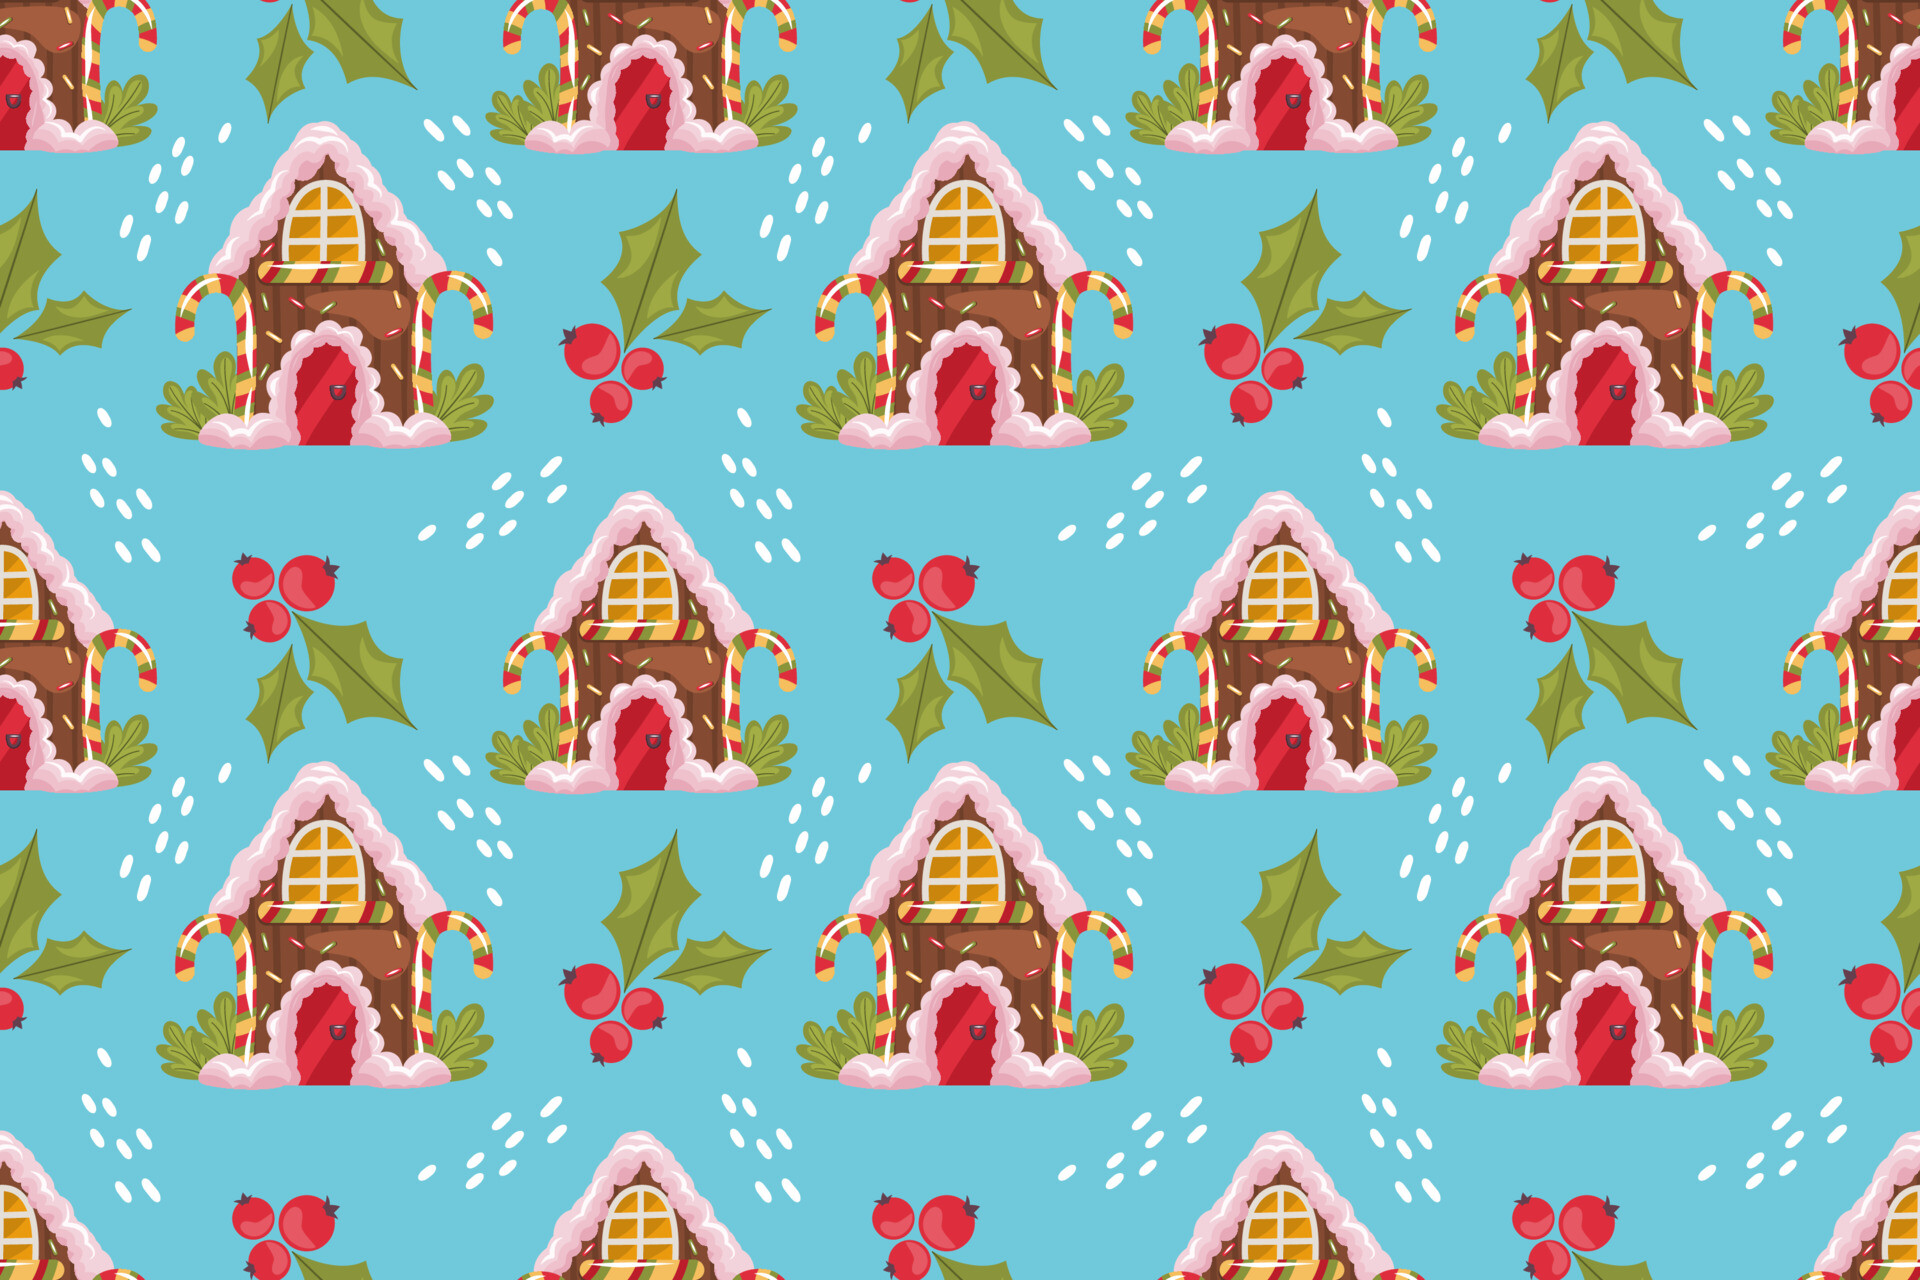 Gingerbread House: Christmas decoration, Candy canes, Christmas-themed candy. 1920x1280 HD Wallpaper.